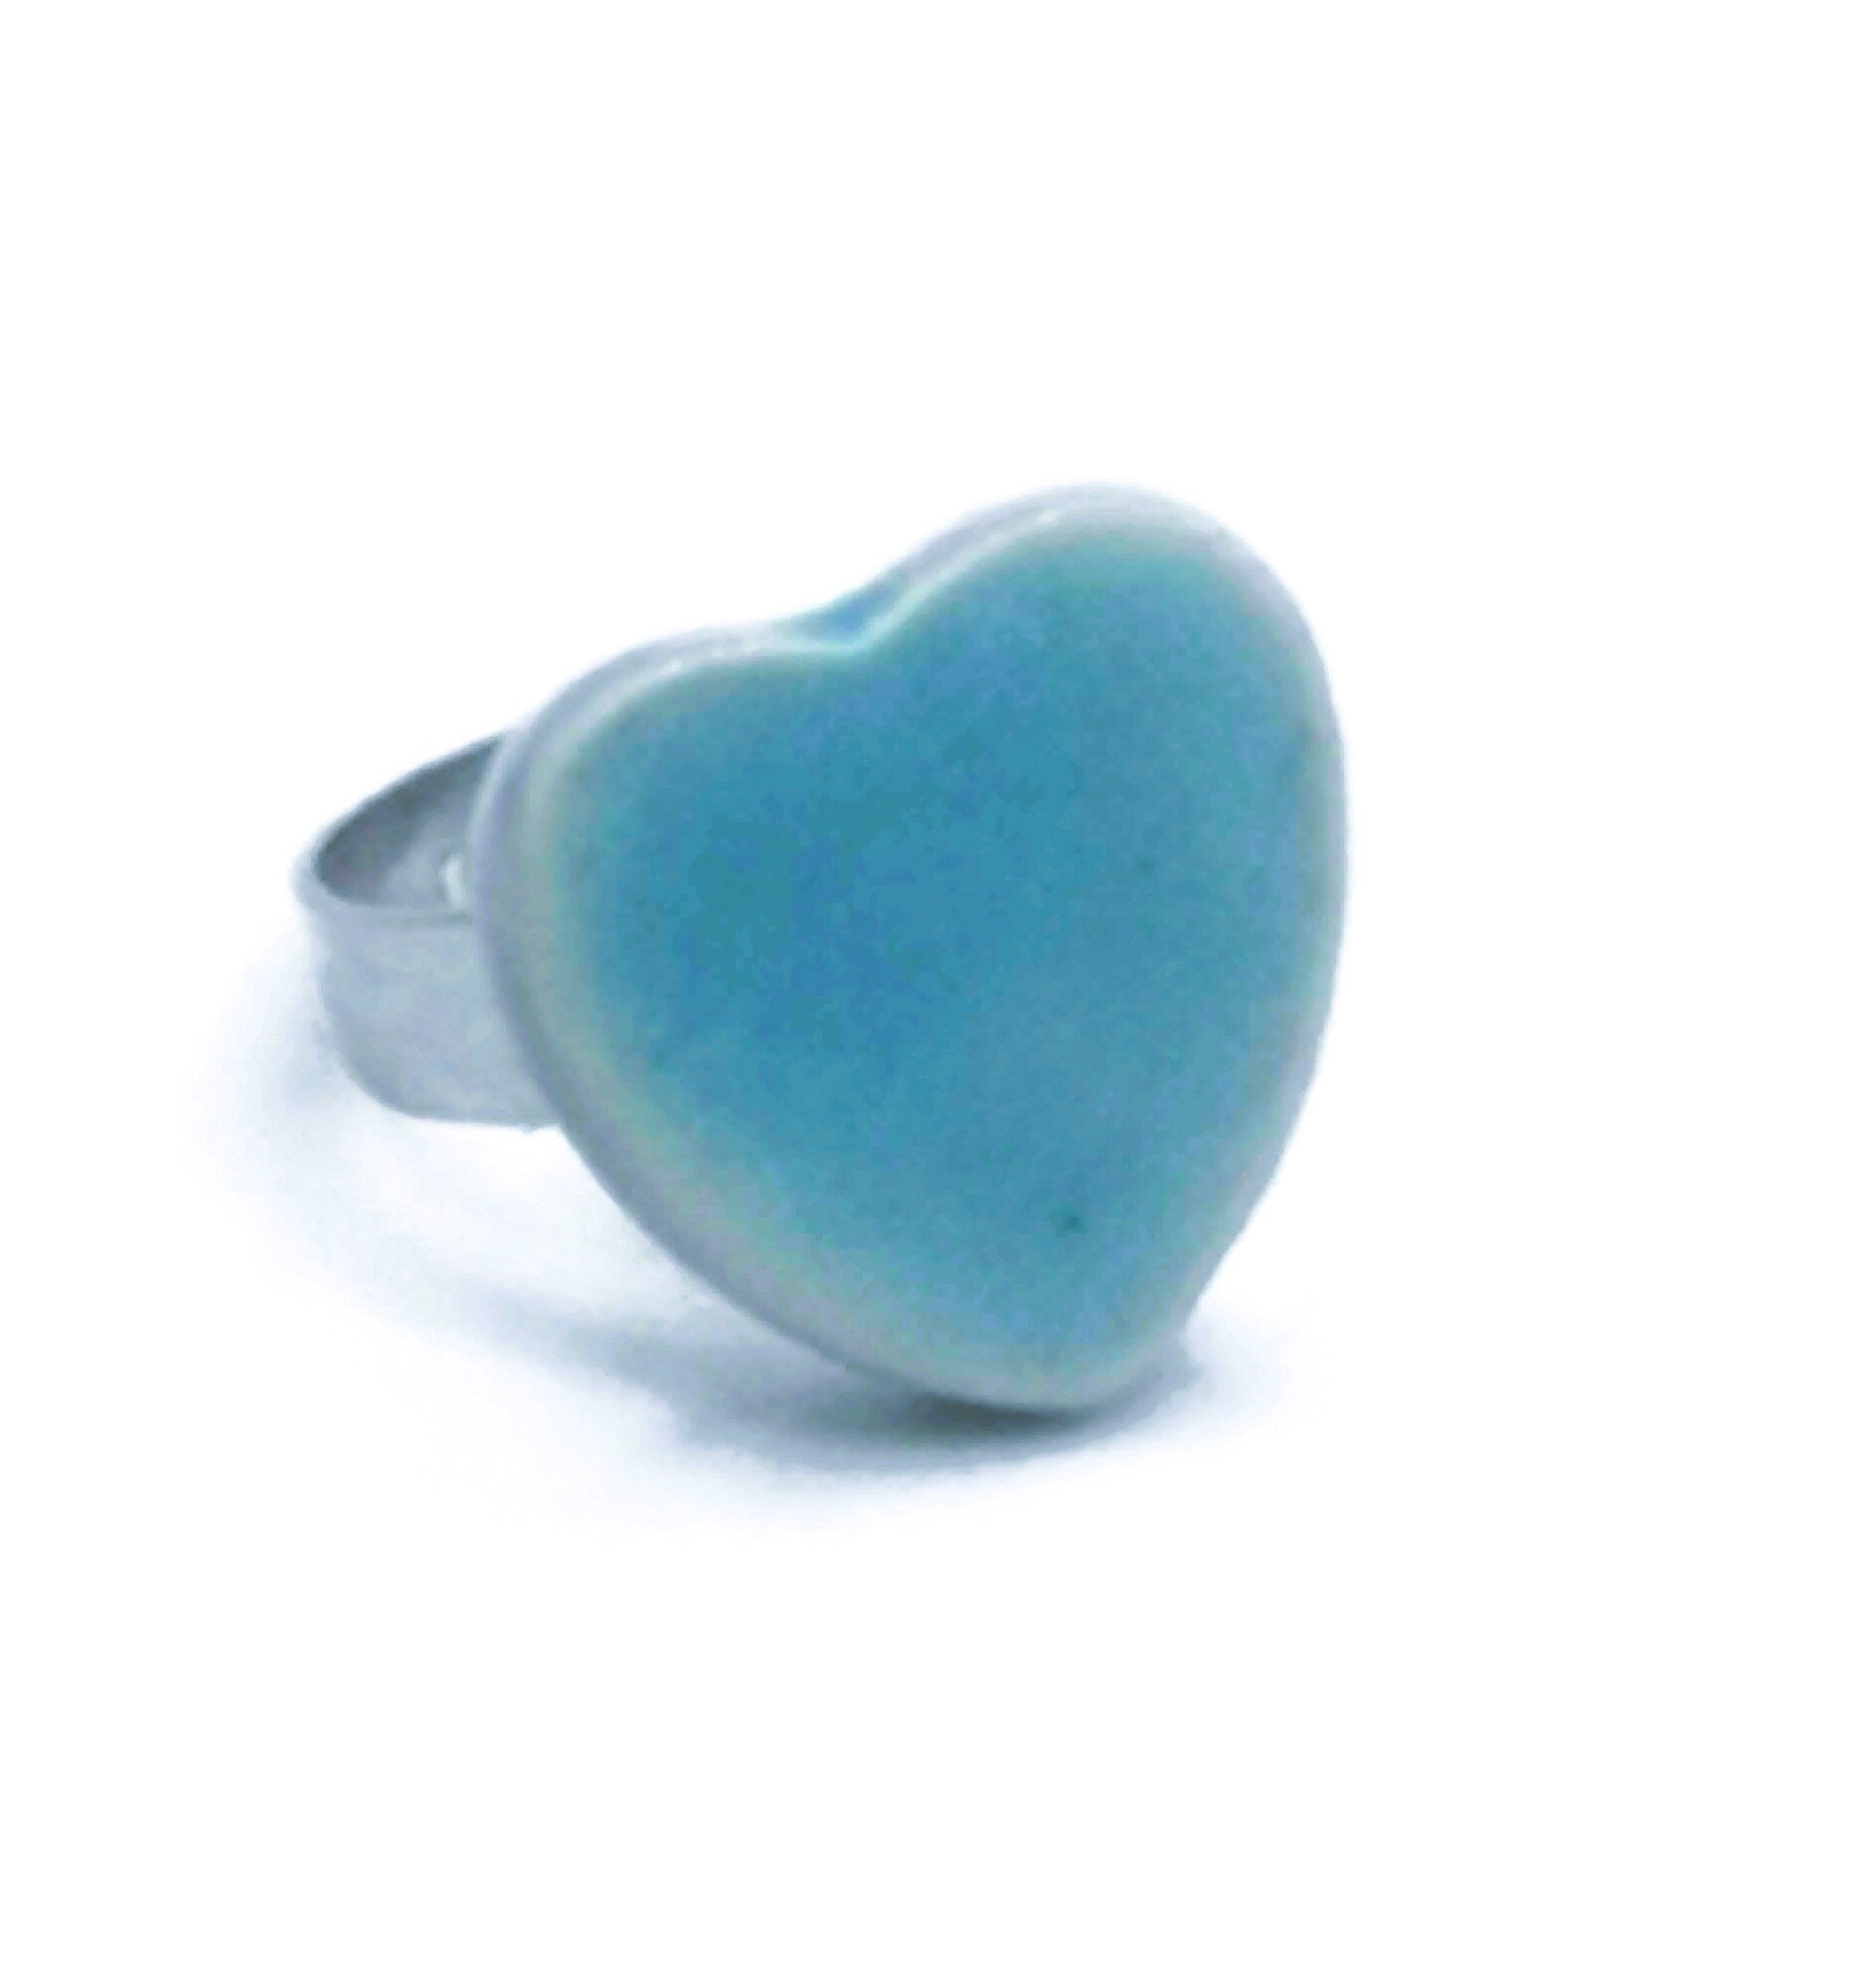 Handmade Ceramic Turquoise Blue Heart Statement Ring For Women, Stainless Steel Adjustable Ring, Porcelain 9th Anniversary Gifts For Her - Ceramica Ana Rafael